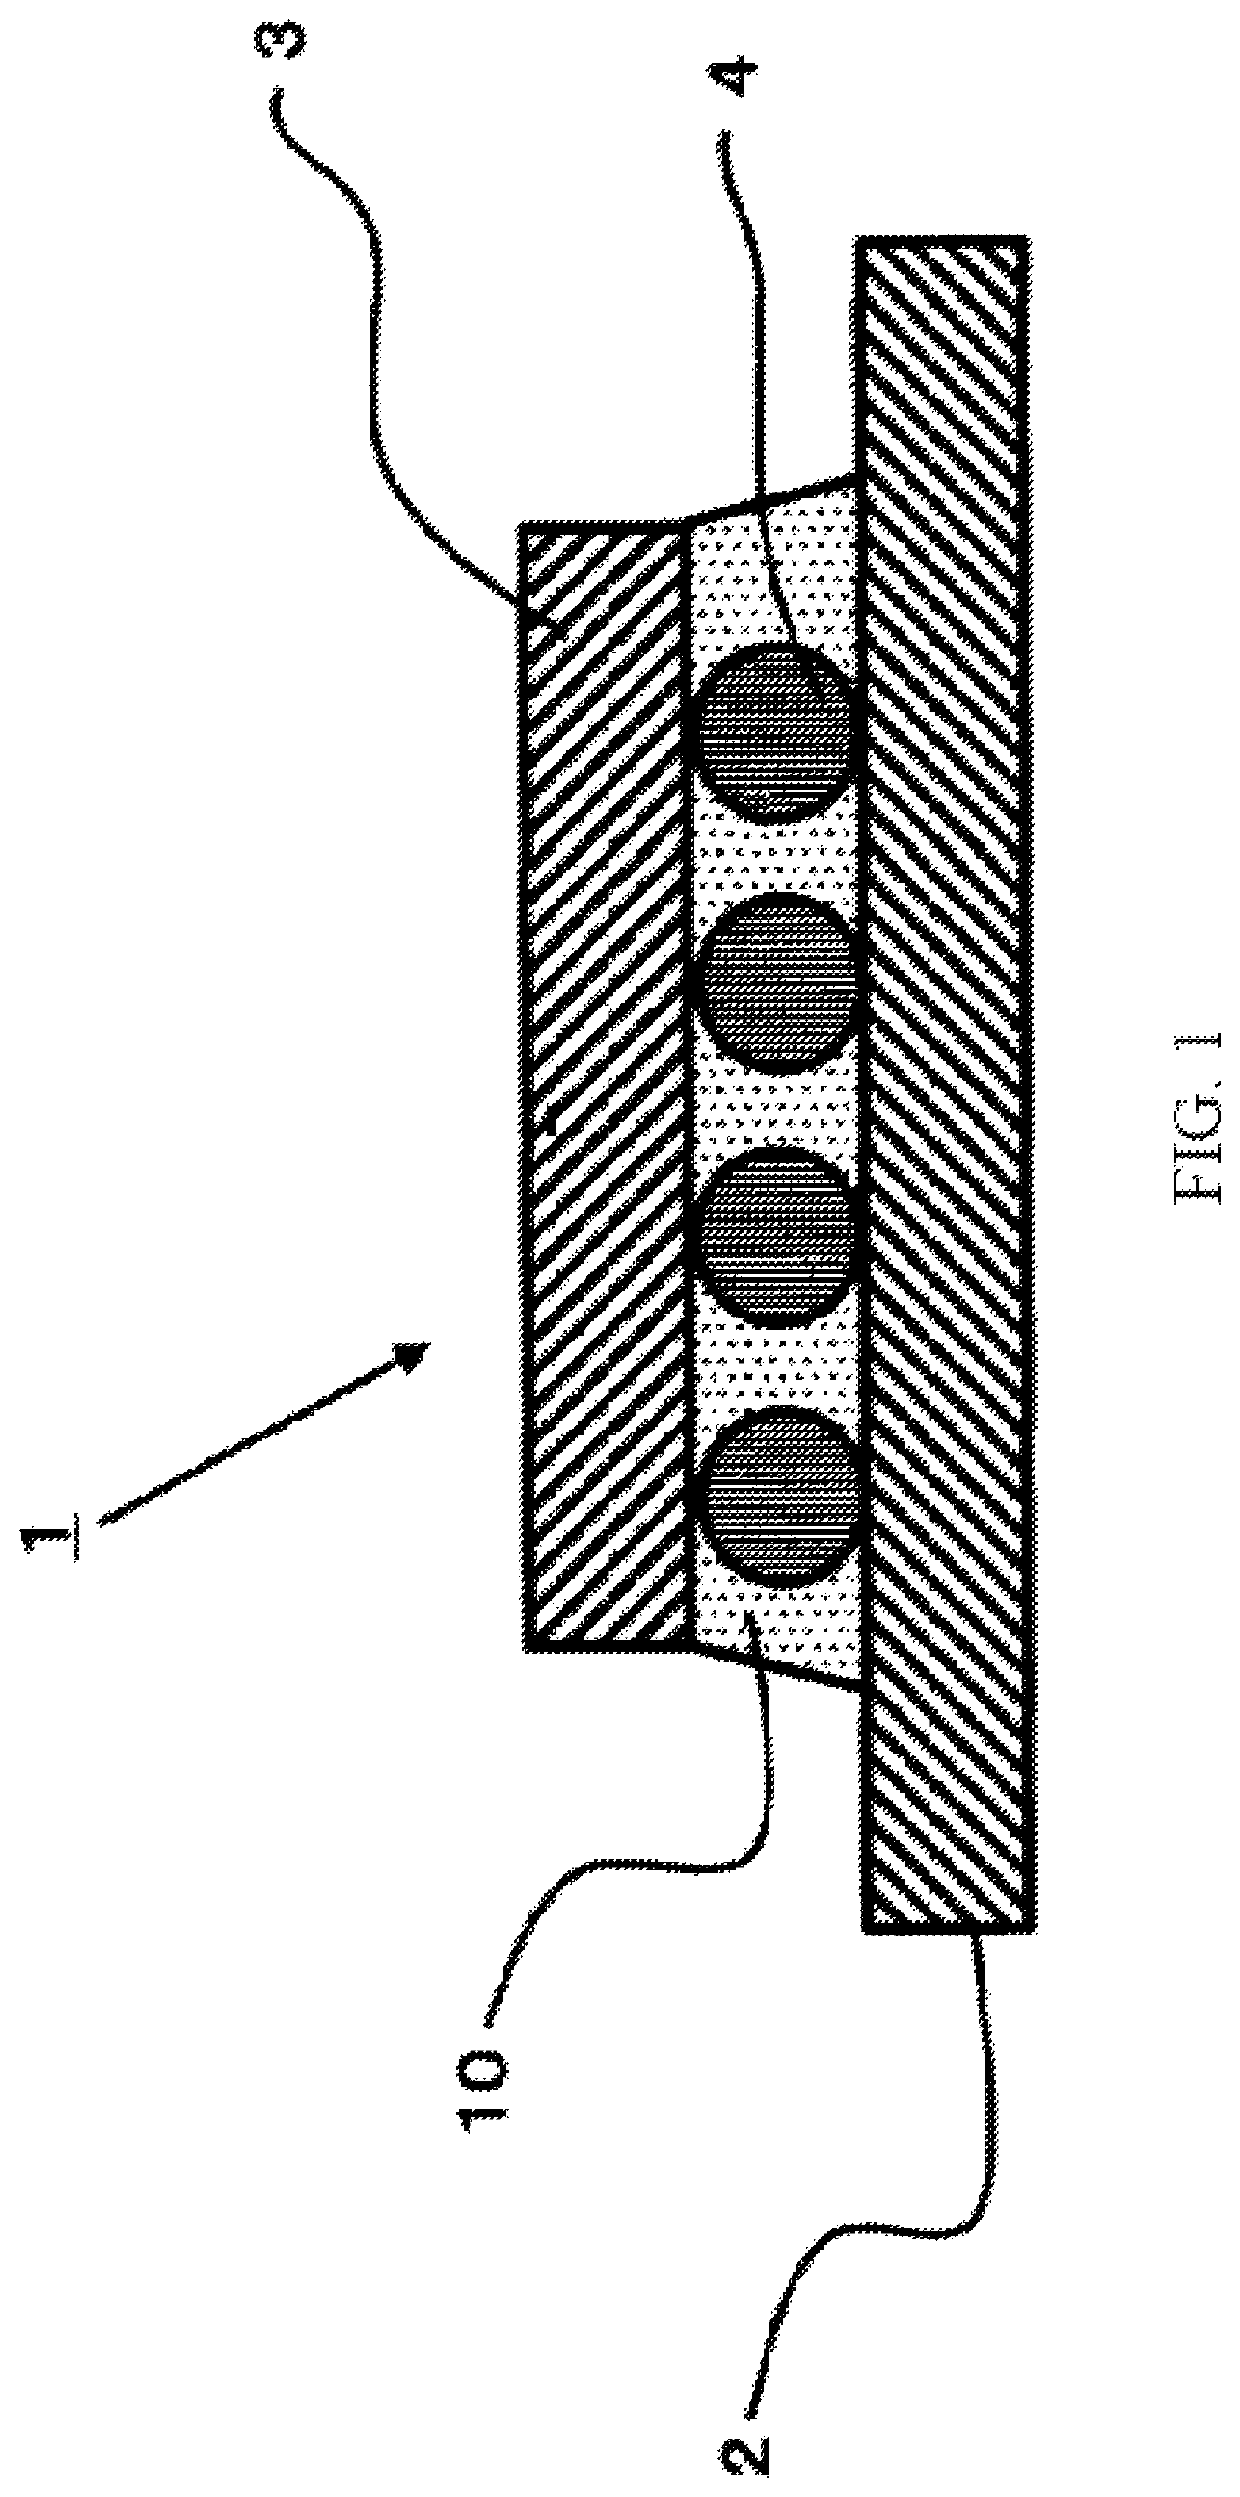 Resin composition for reinforcement and electronic component device